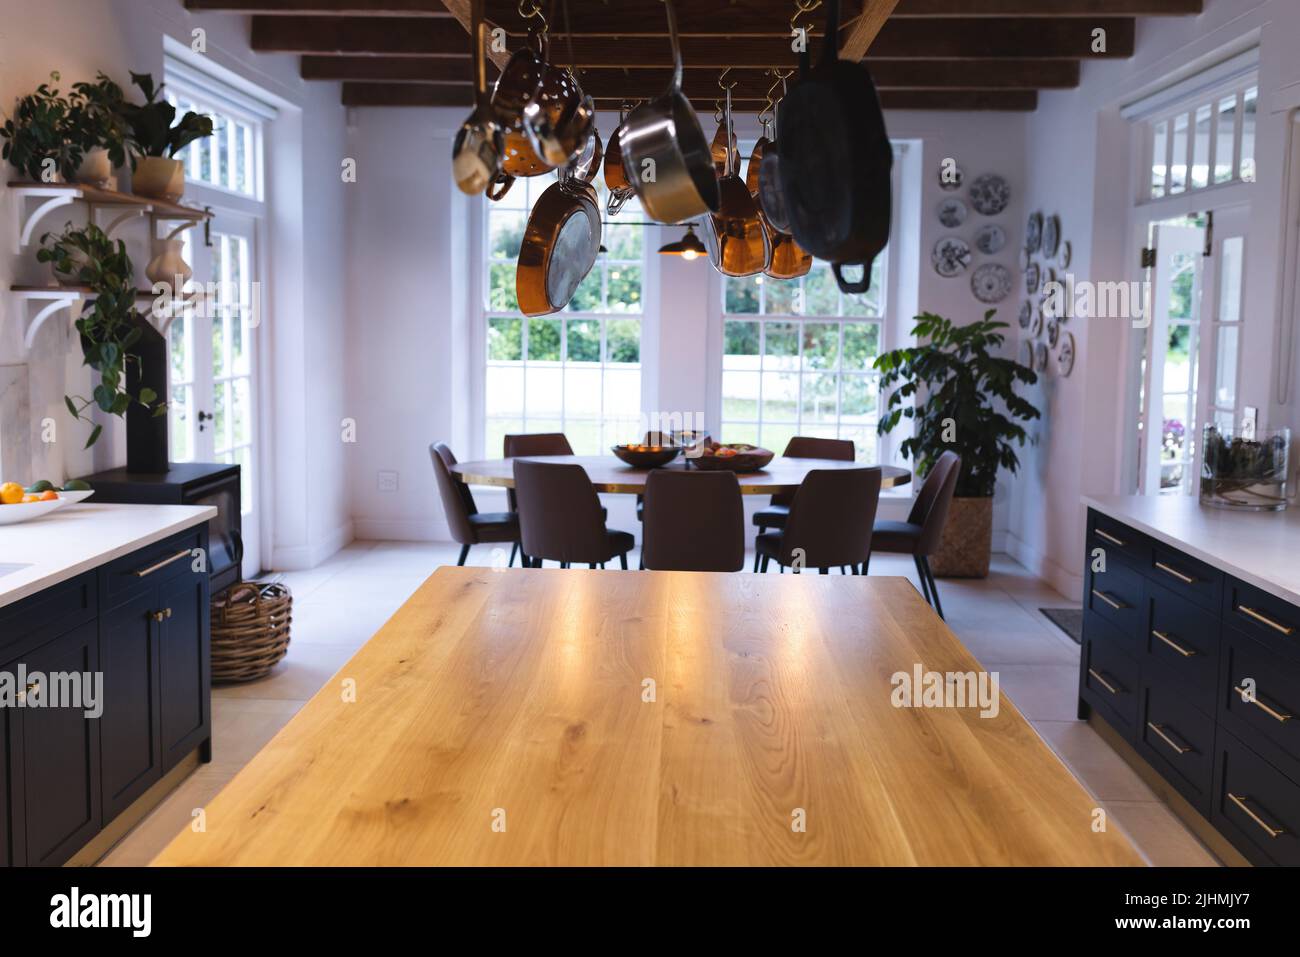 Image of empty kitchen with pots hanging over table Stock Photo